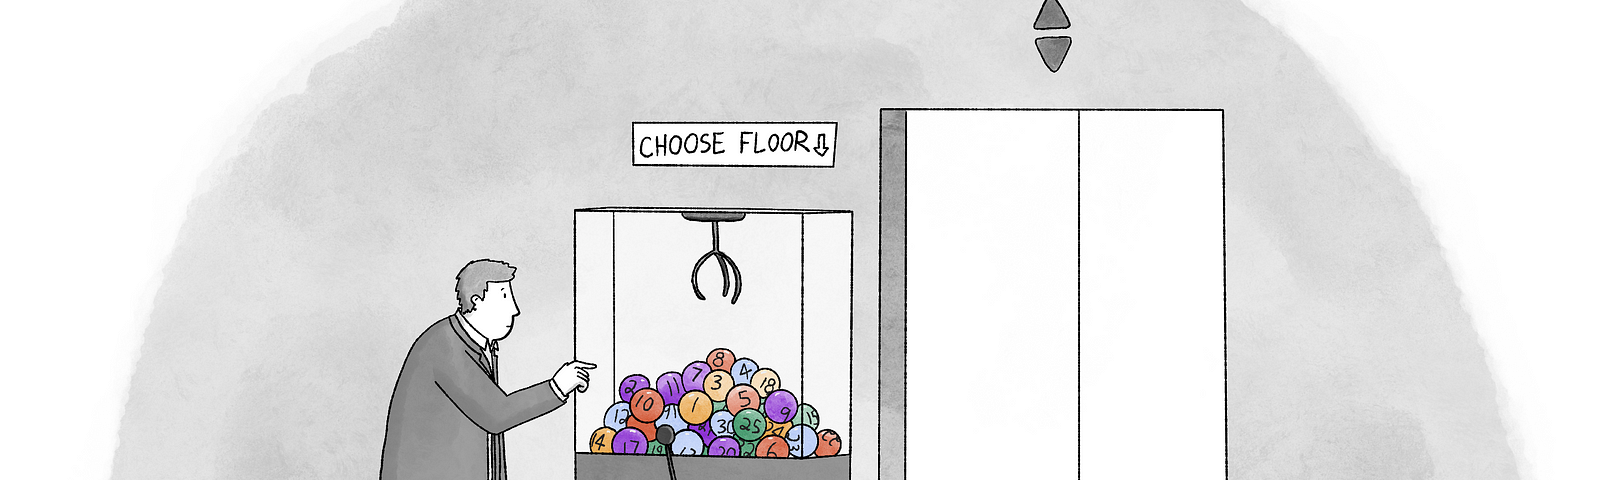 A cartoon of a person using a claw machine to use an elevator